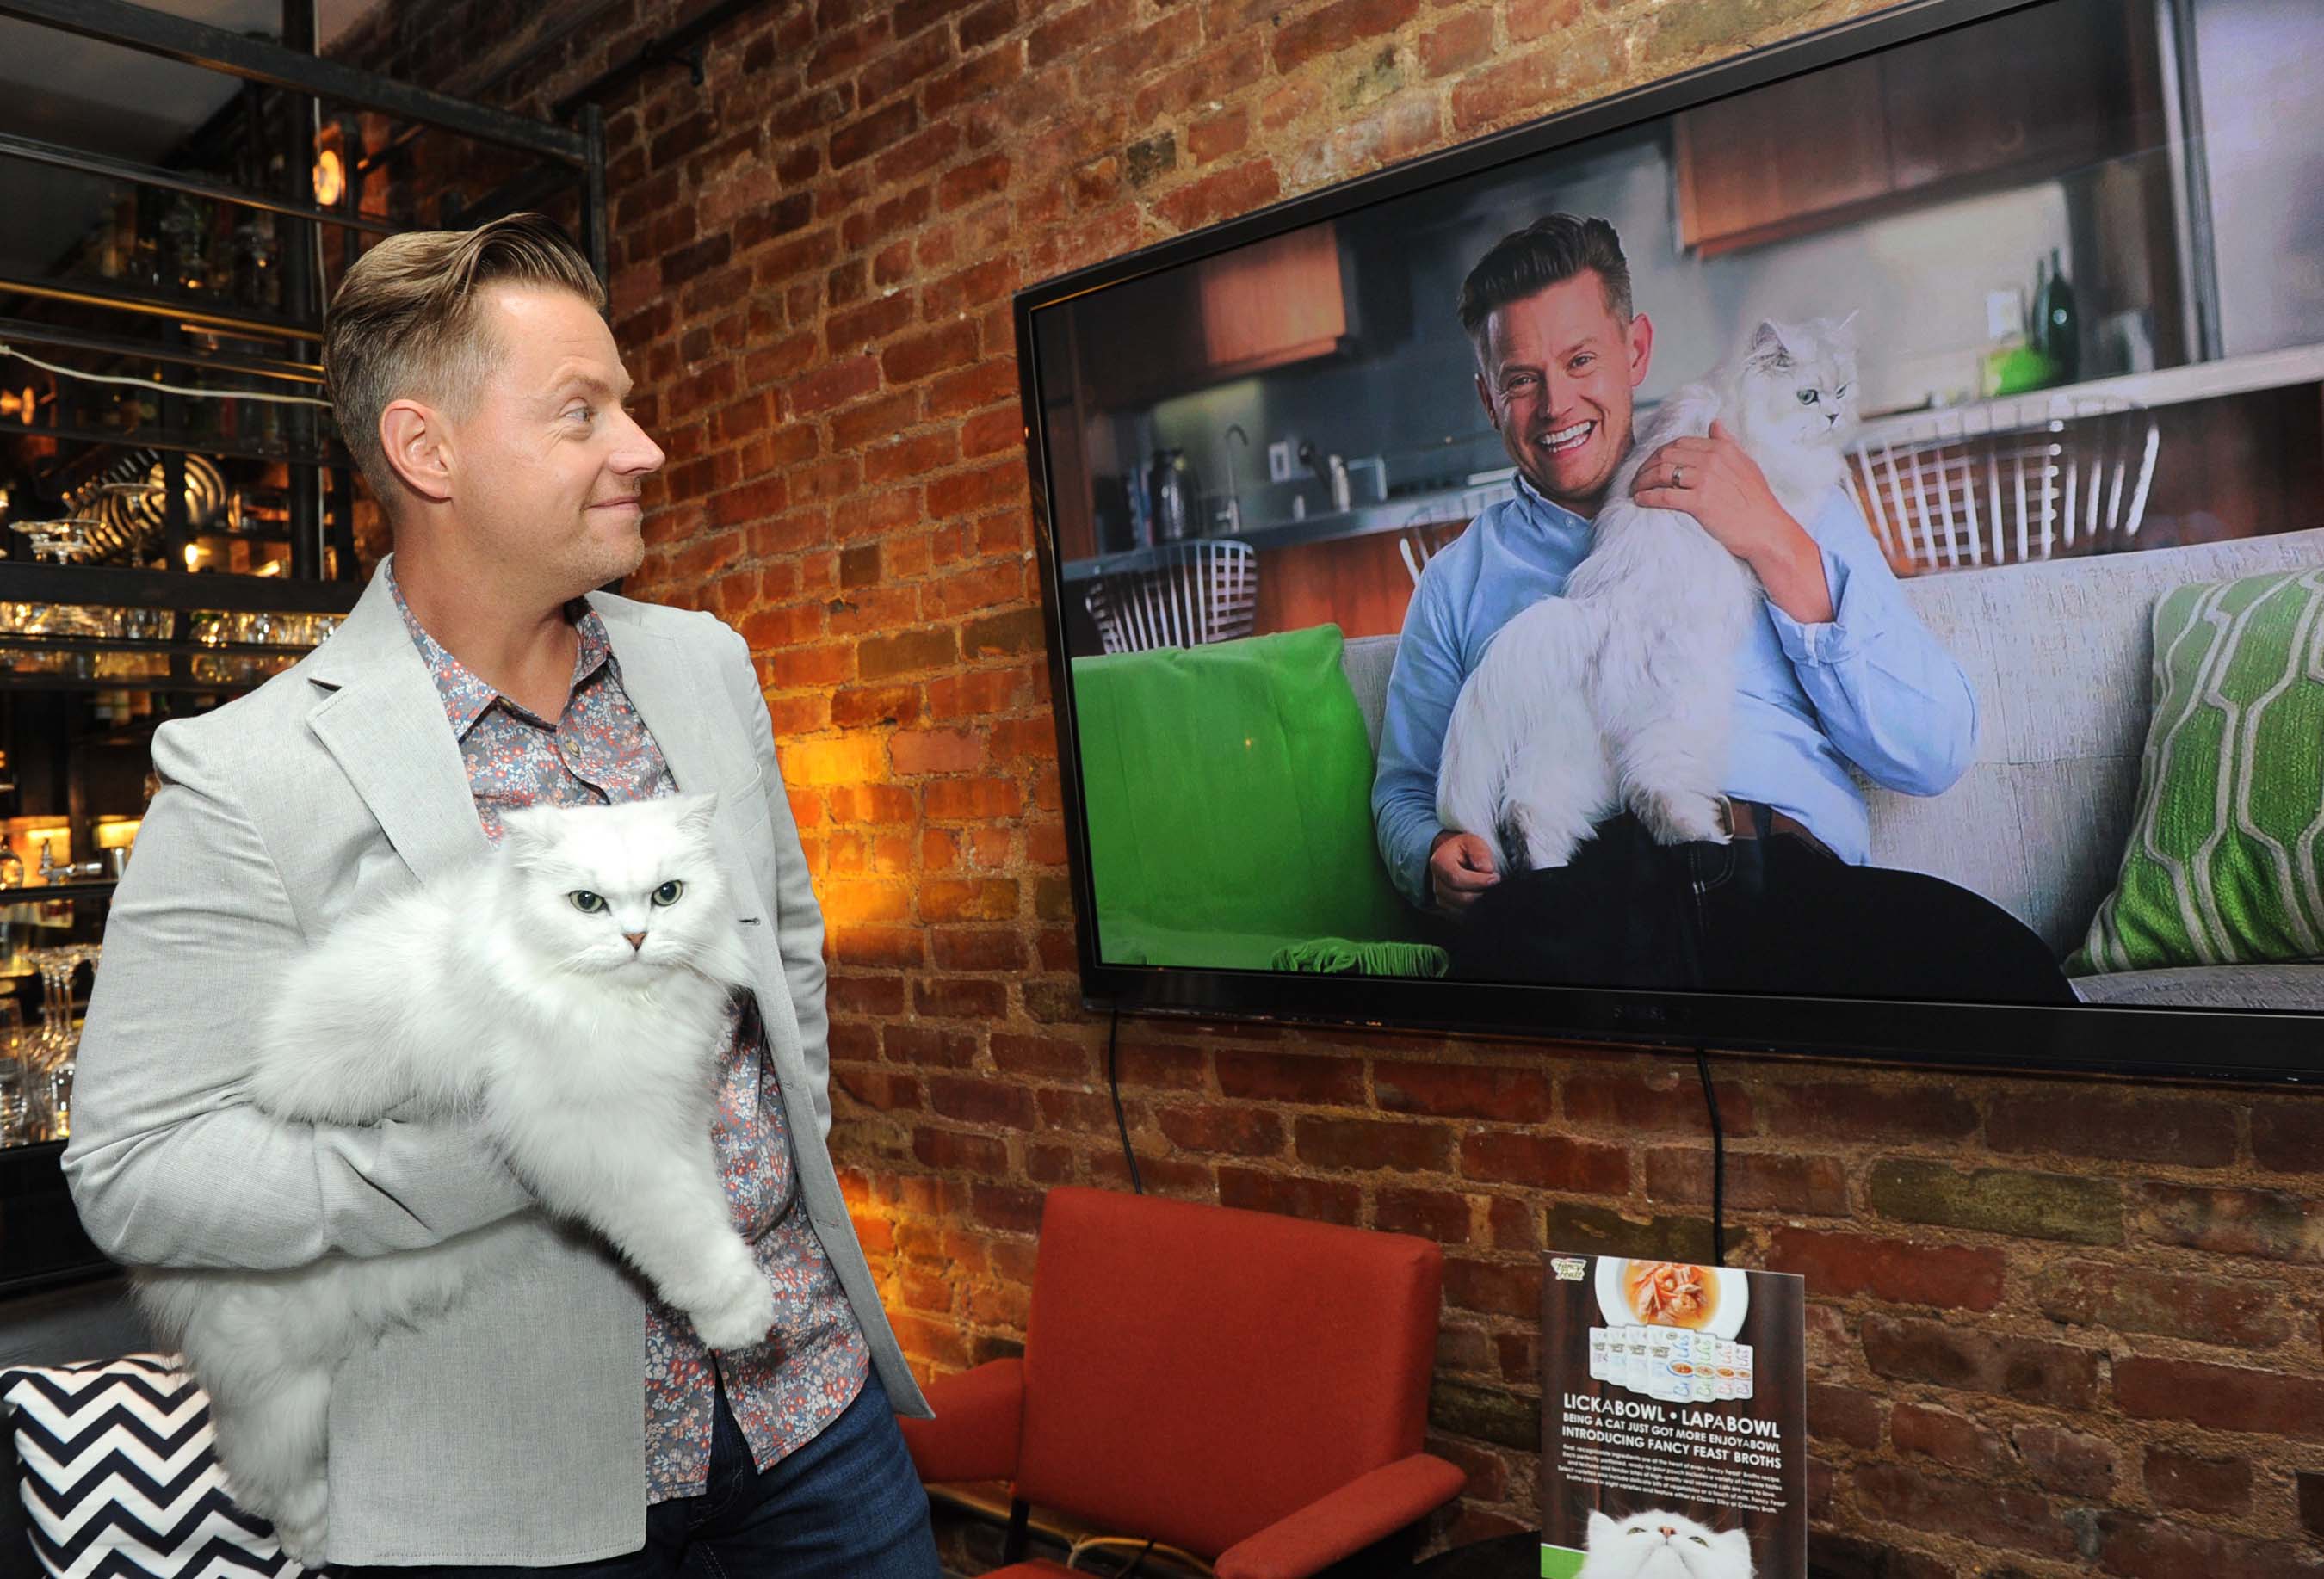 Chef and restaurateur Richard Blais celebrates the launch of Fancy Feast(R) Broths in New York City on Tuesday, July 22. Blais hosted the event to introduce Broths as well as a new video starring himself opposite the iconic Fancy Feast cat.